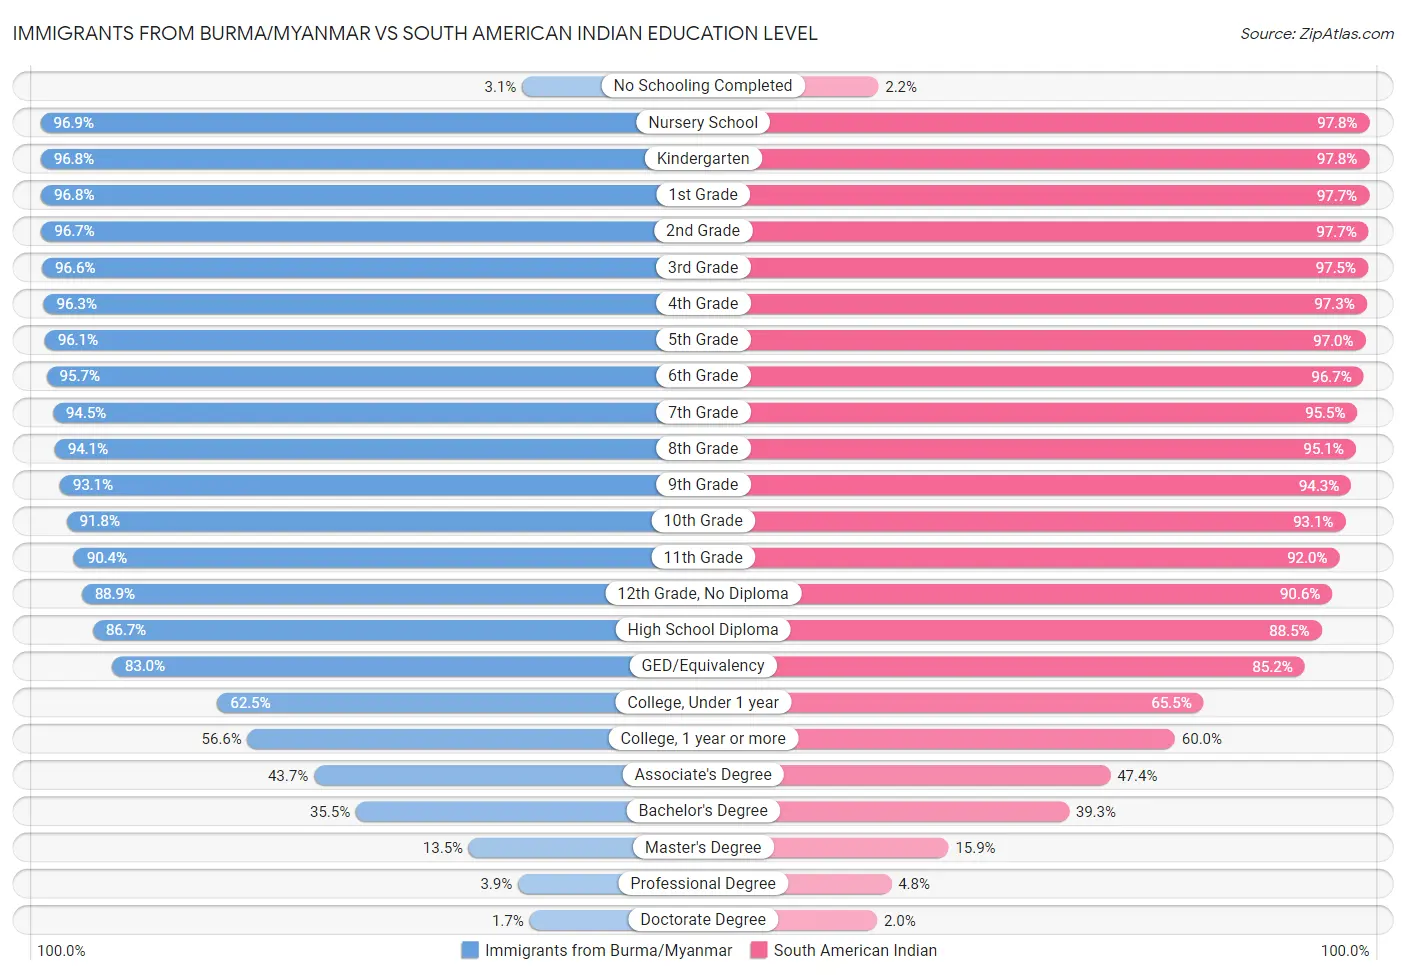 Immigrants from Burma/Myanmar vs South American Indian Education Level